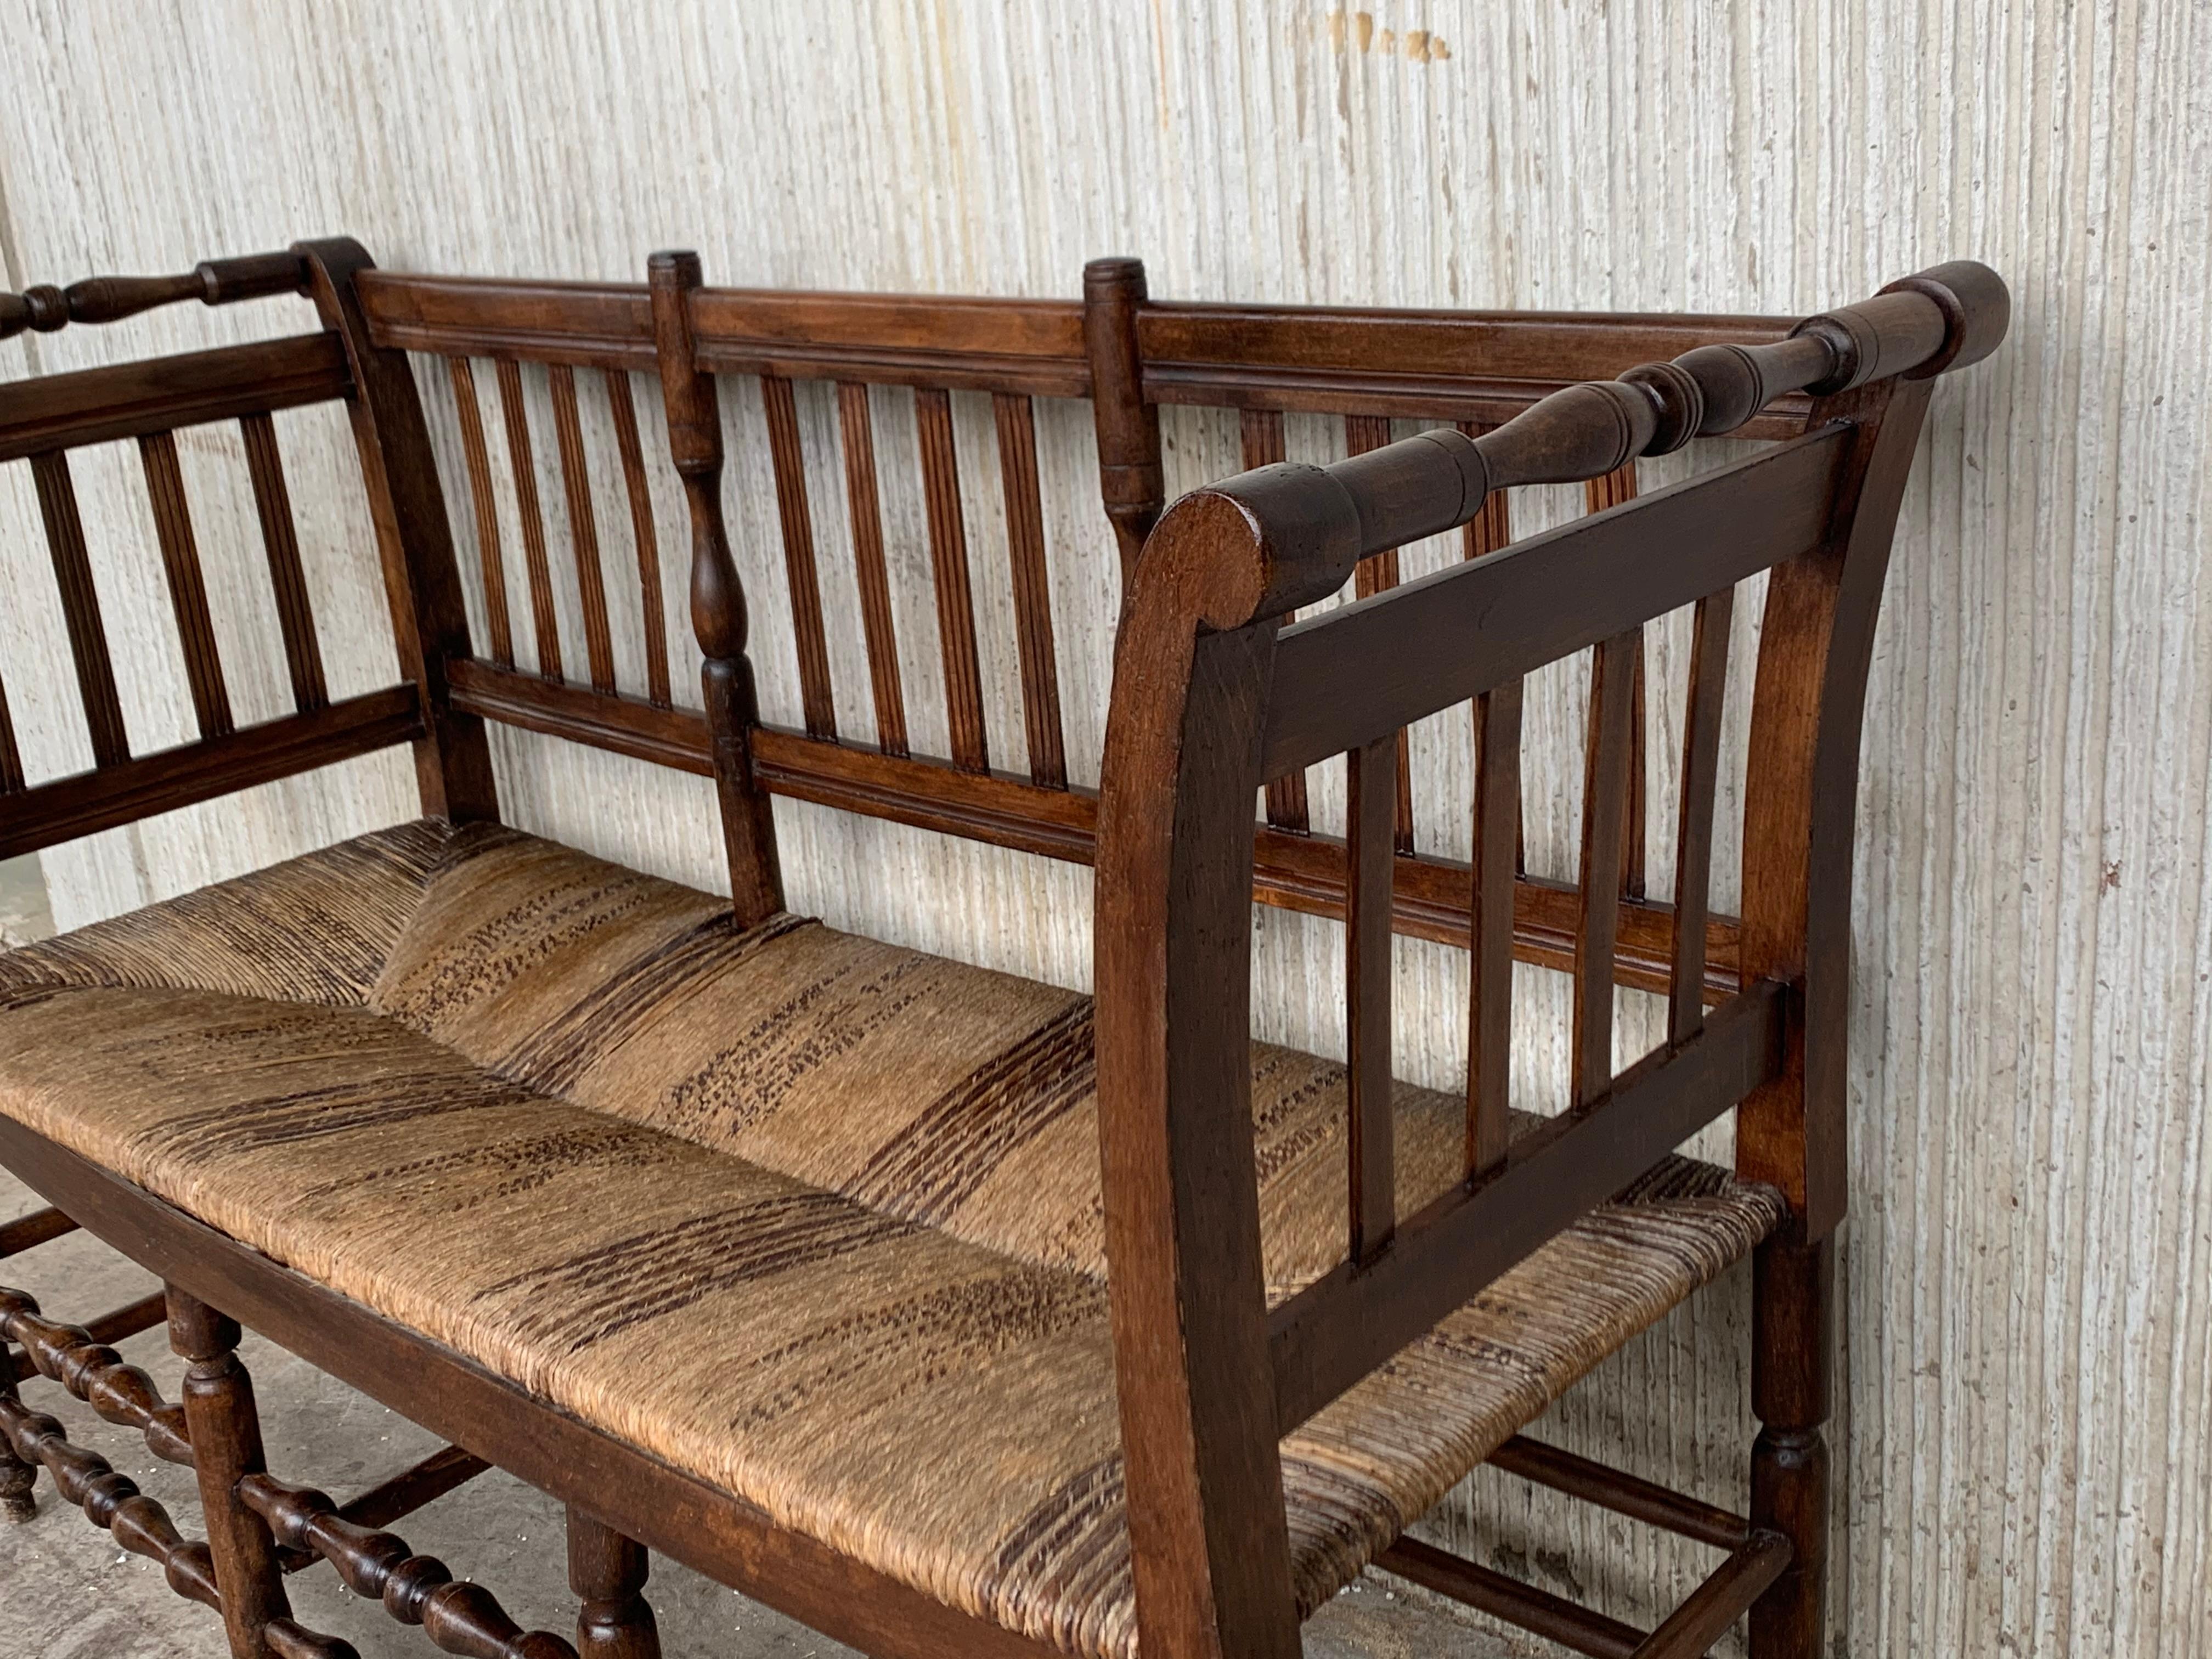 Spanish Colonial 20th Century Catalan Bench in Walnut with Caned Seat For Sale